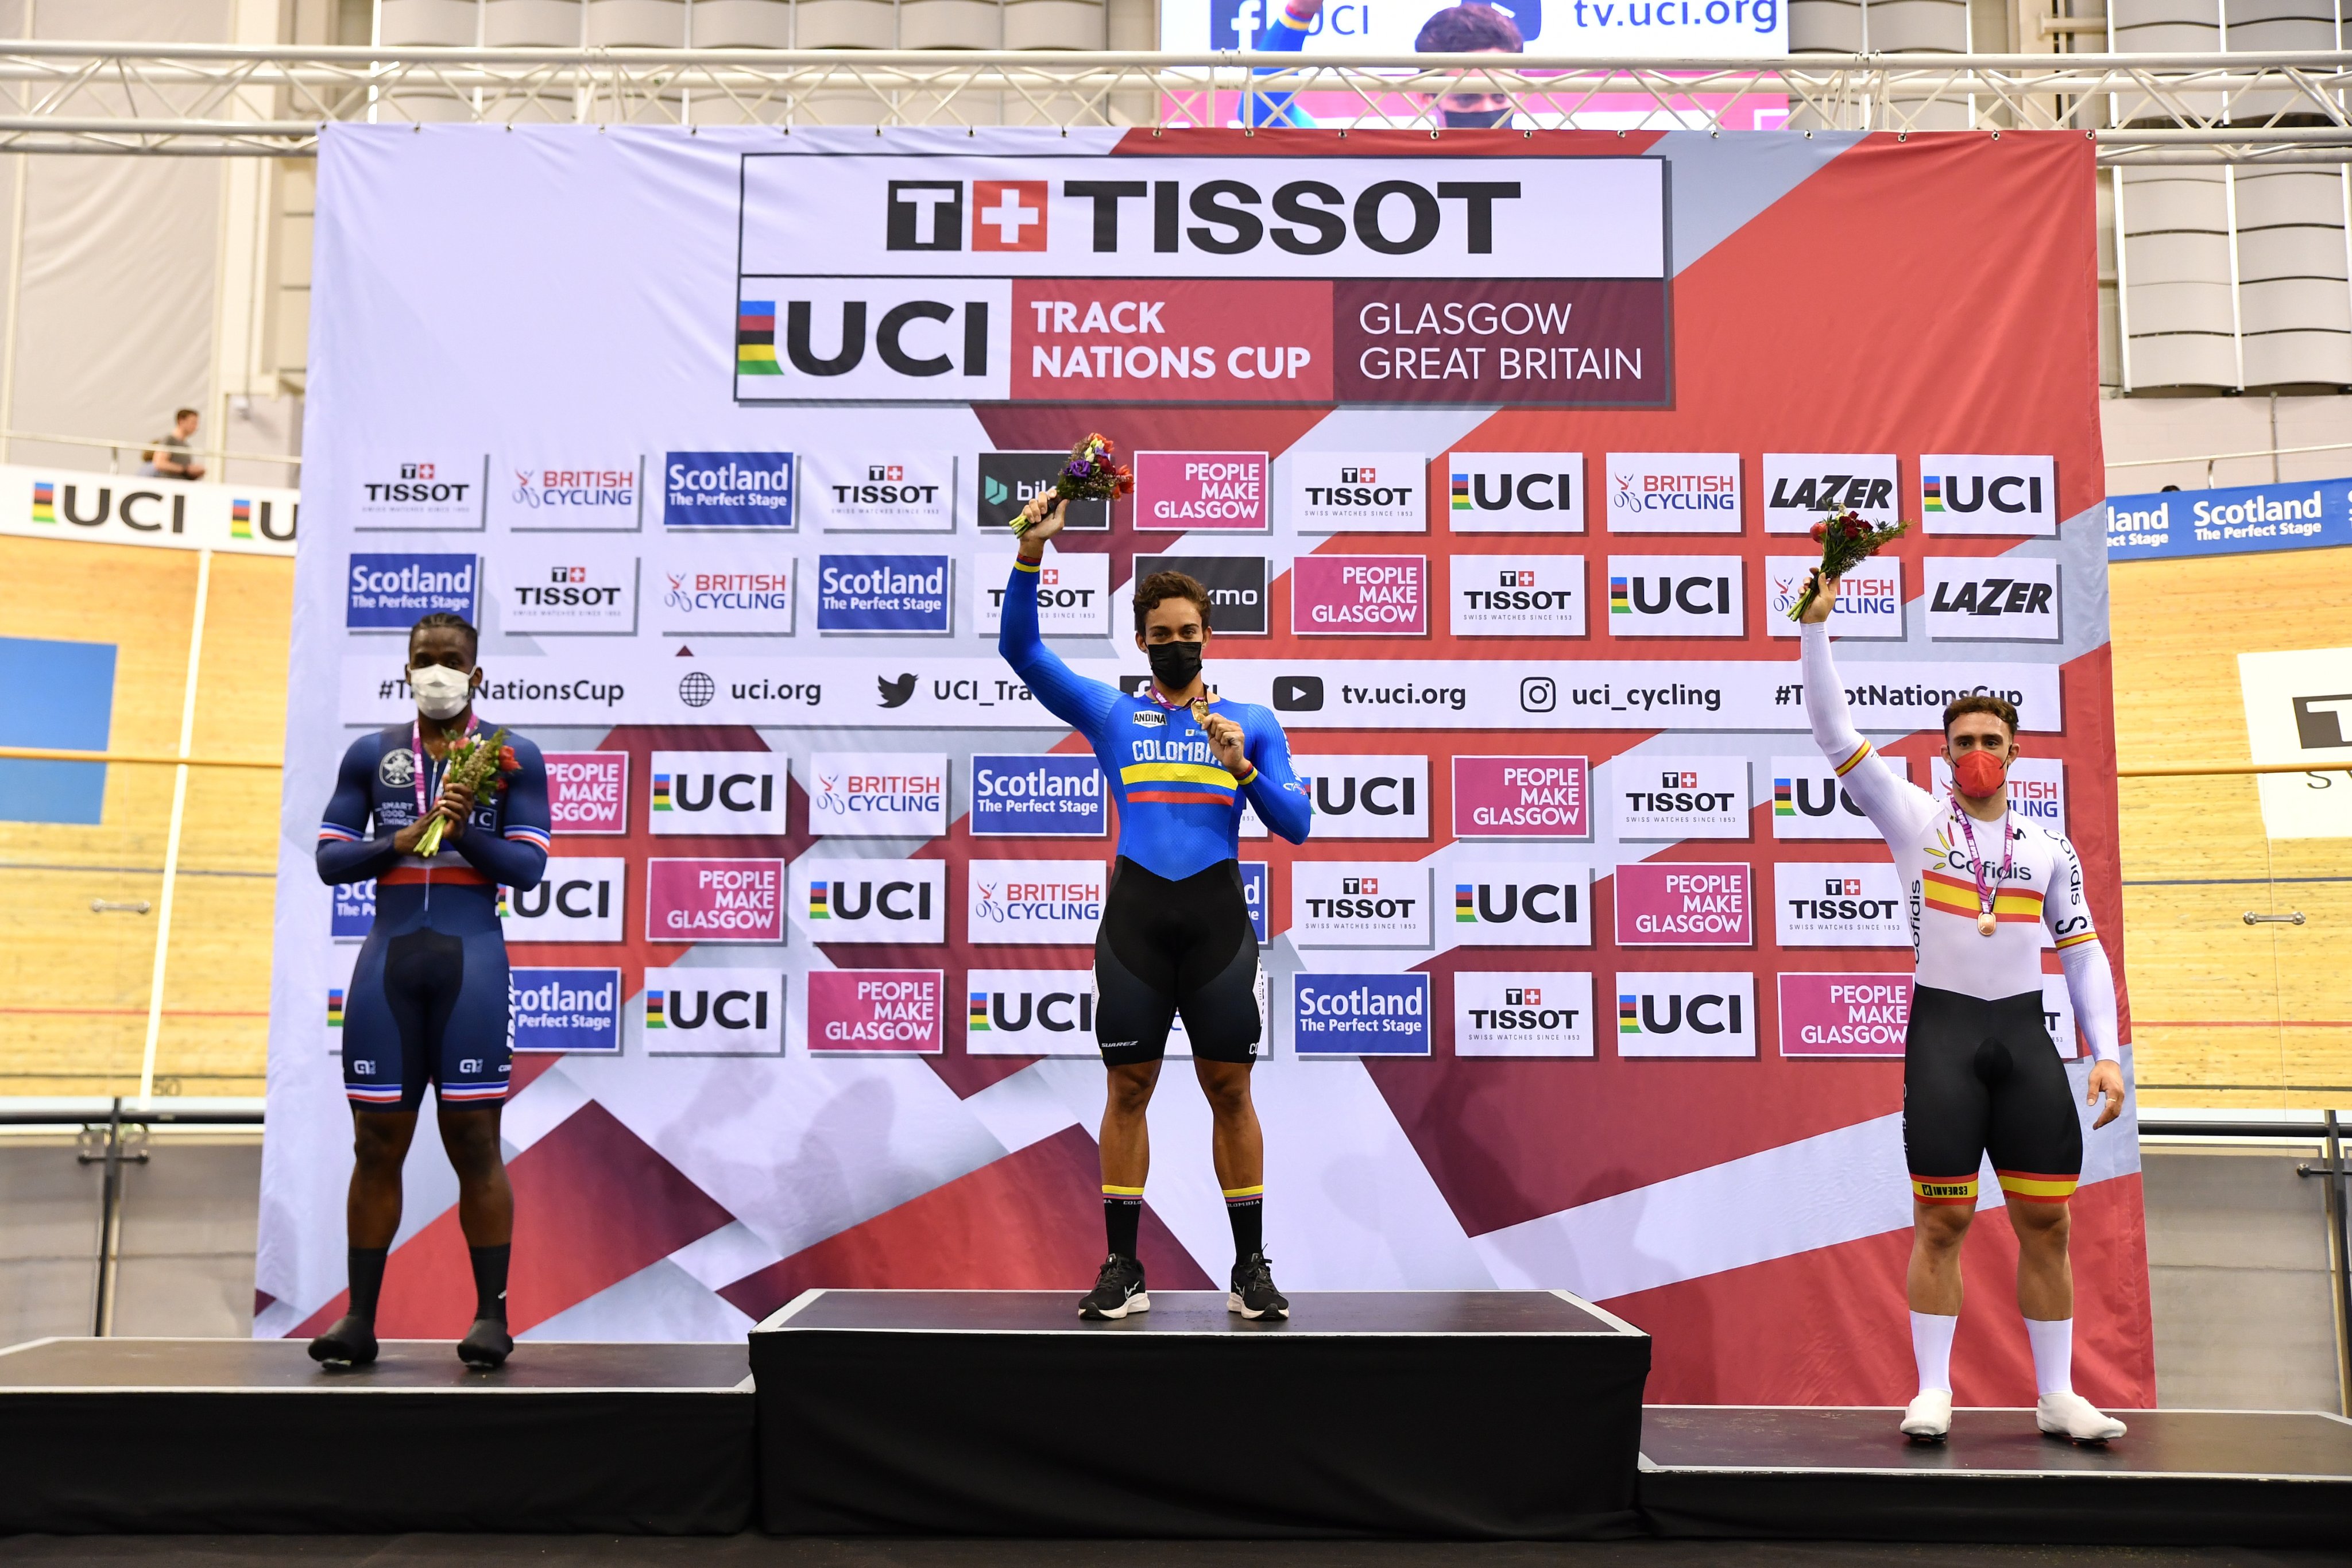 Champion! Cristian Ortega won gold medal in the Track Cycling Nations Cup